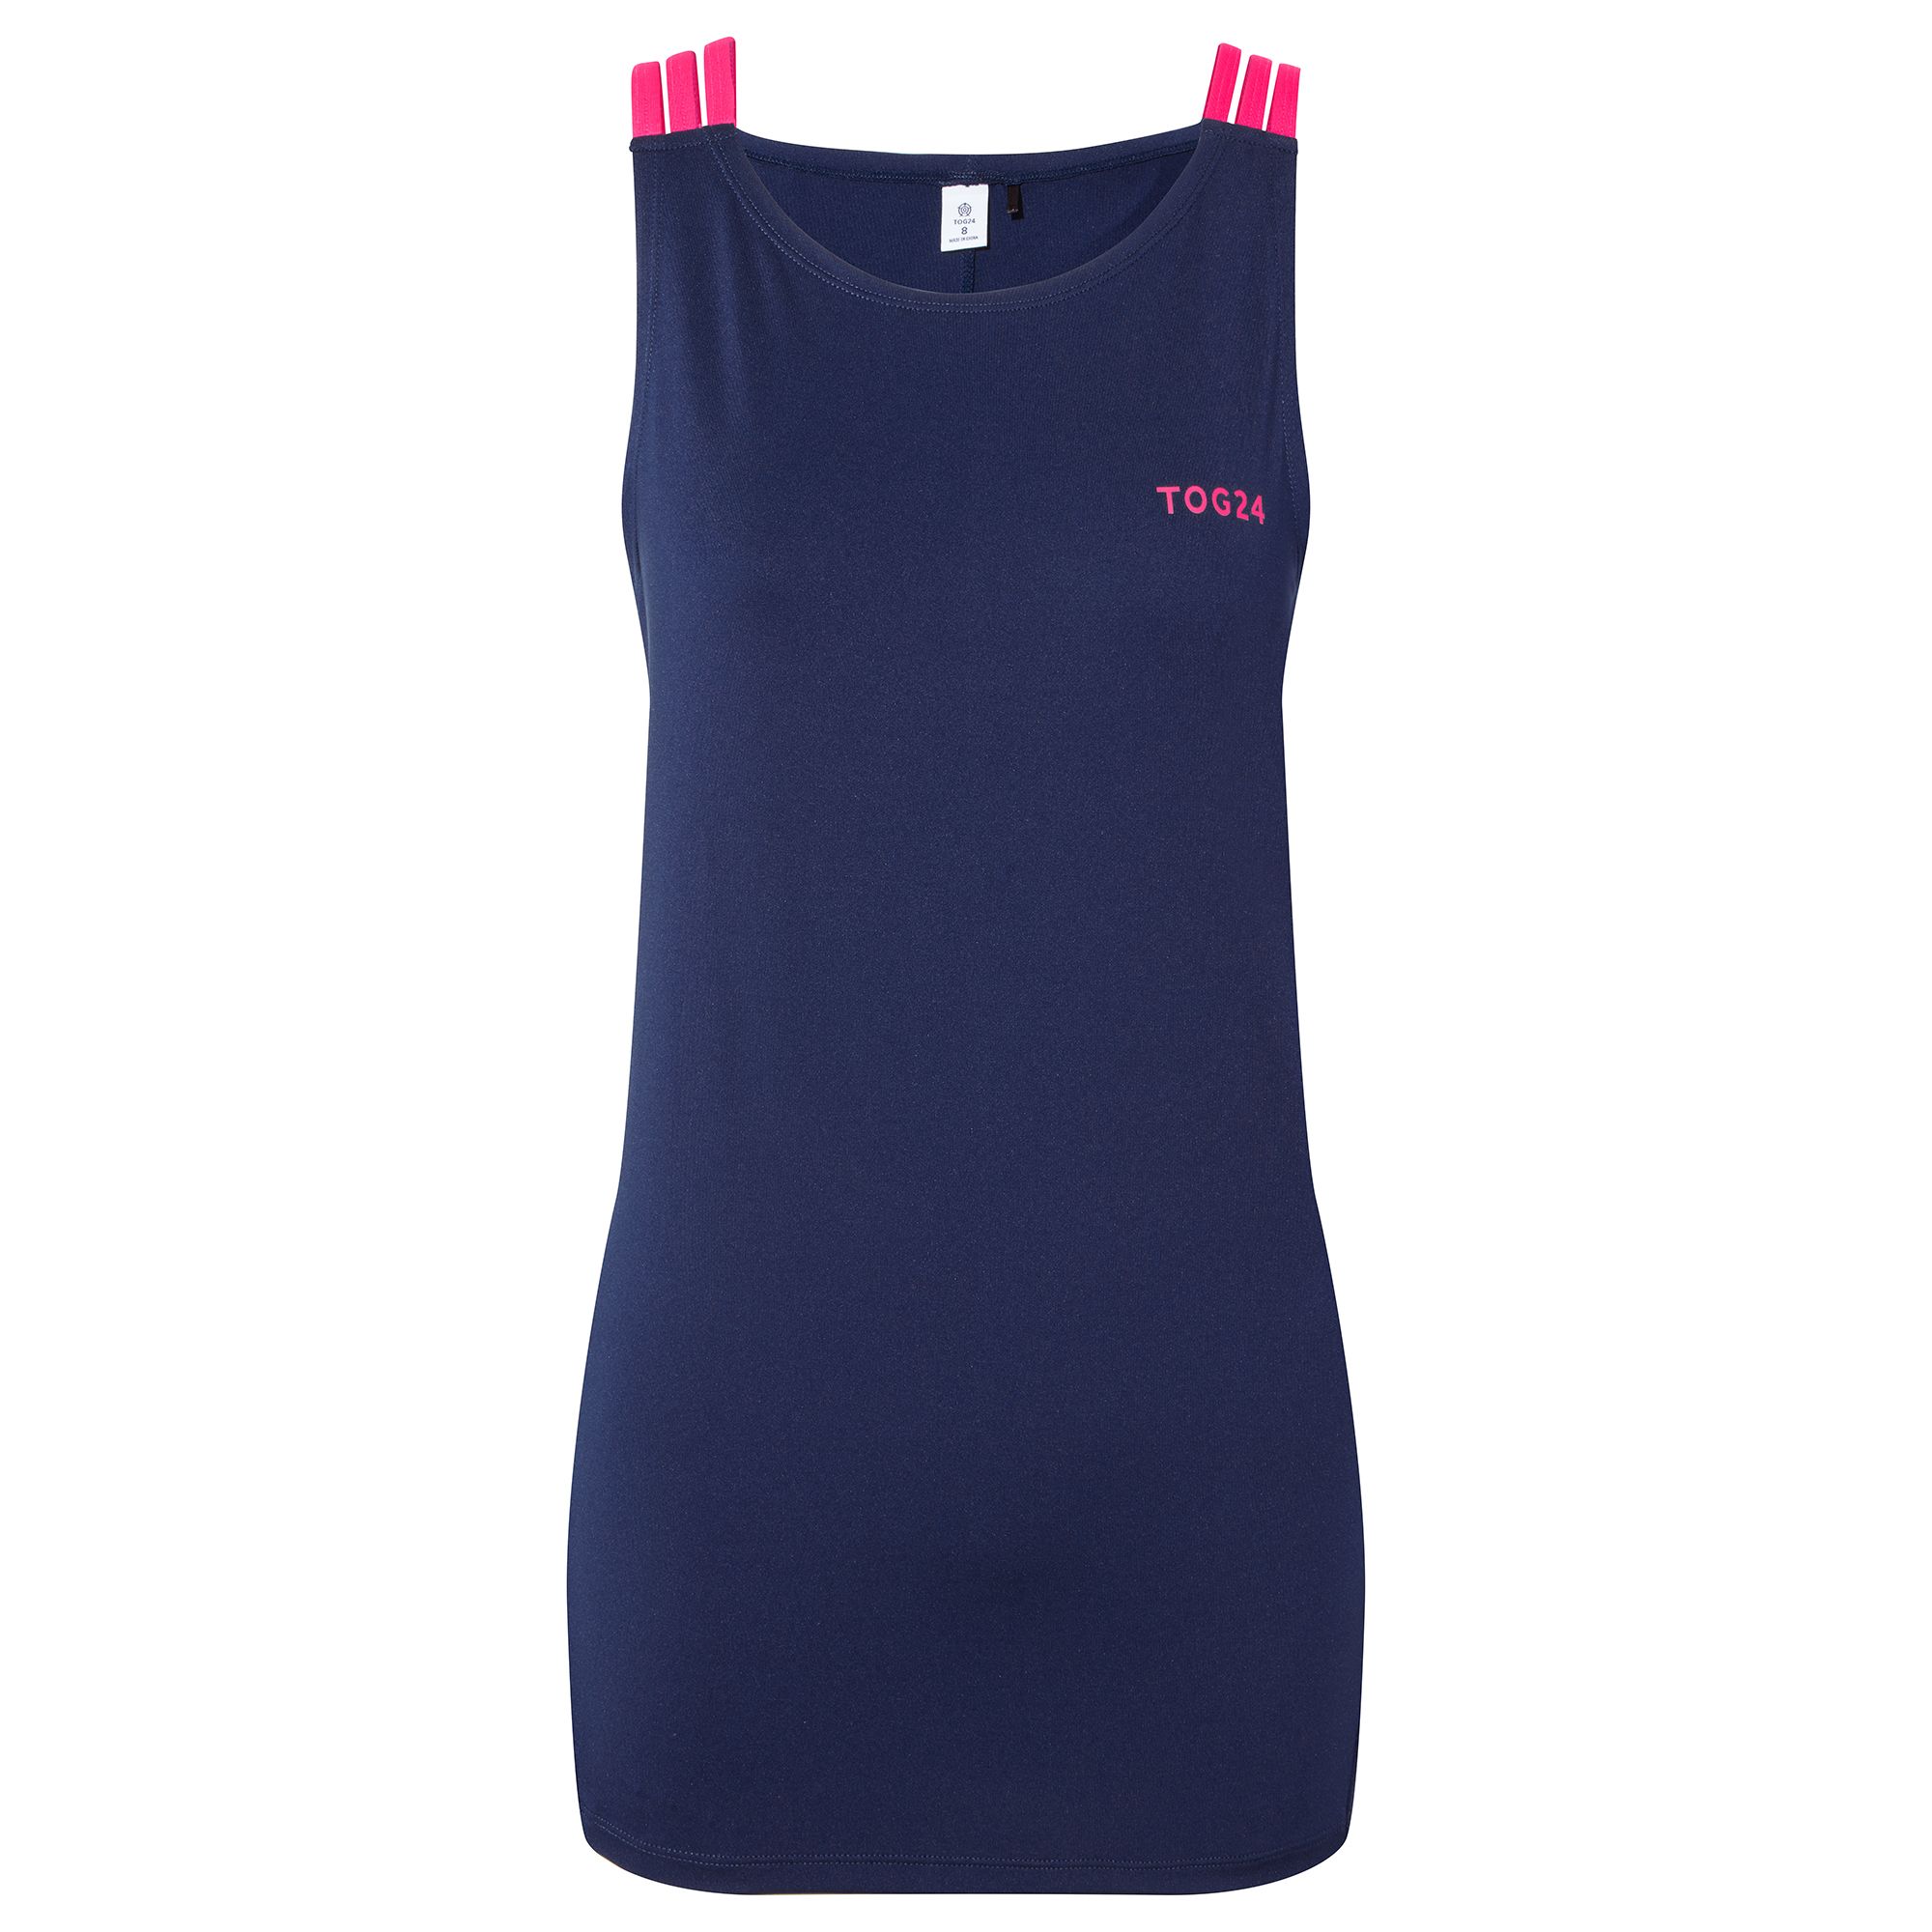 Women's activewear just got a little more elegant with our high-tech vest top, Langan. Cut in a flattering shape with a dipped hemline that's slightly longer at the back for extra coverage, this supersoft sports vest gives you the confidence to push yourself further. Crafted from 4-way stretch fabric that moves with your body in every direction, Langan is perfect for teaming with leggings and wearing to a Pilates class, yoga session or Zumba workout. Lightweight, breathable and designed to help keep you dry from warm up to cool down, Langan wicks sweat away from your skin so you never feel damp and clammy. Delicate strap detailing on the shoulders lifts this gorgeous vest out of the ordinary, making it just as perfect for wearing with denim shorts and sandals at the weekend. Beautifully finished by our team in West Yorkshire where Langan was designed, a discreet TOG24 logo printed on the chest in a contrasting colour nods to our ethos of 'Truth Over Glory'.